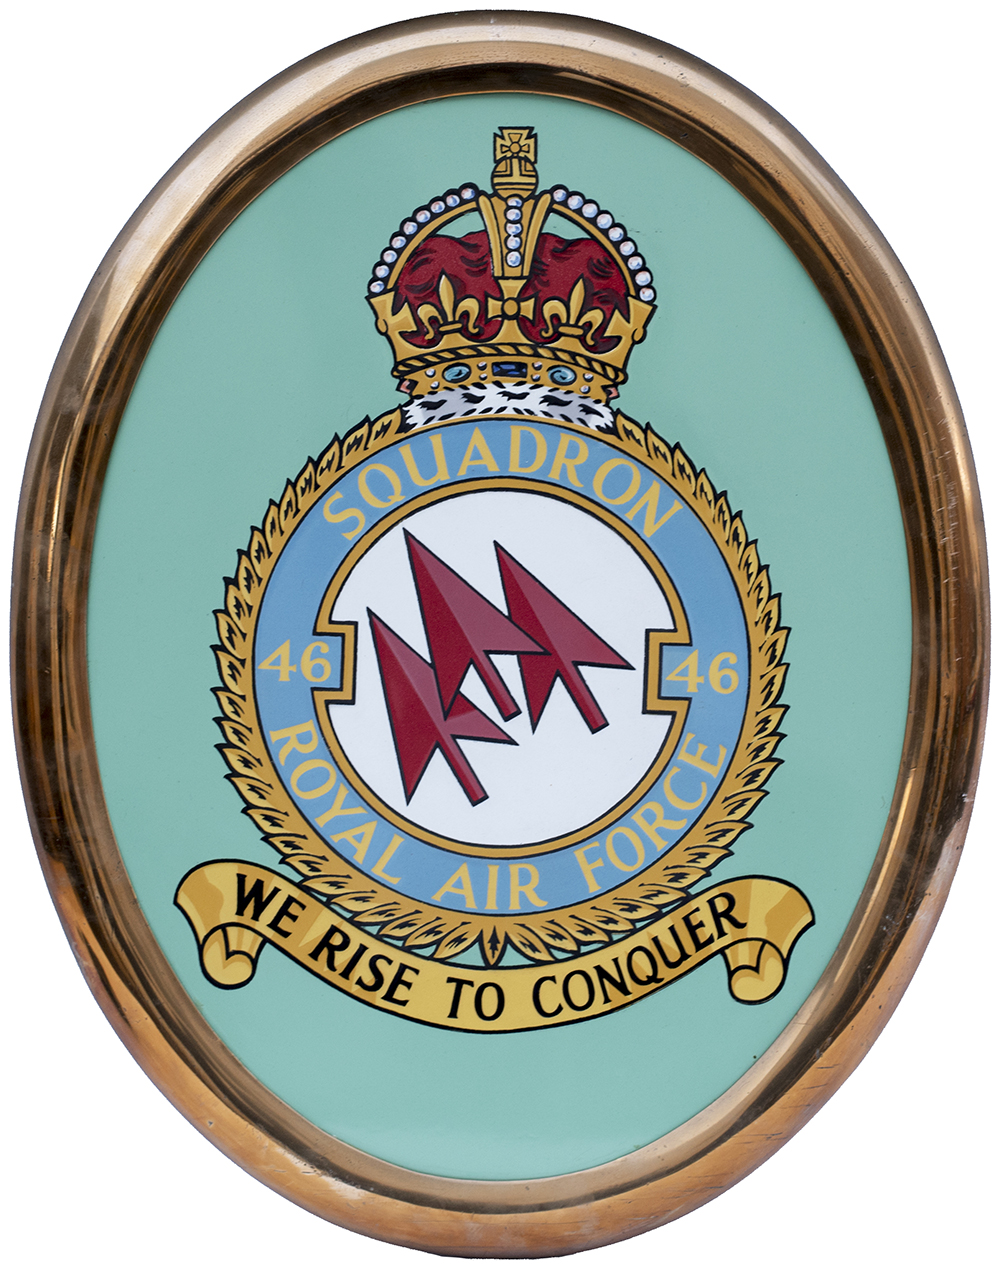 Nameplate shield from Bullied Battle Of Britain light Pacific 4-6-2 46 SQUADRON built at Brighton in